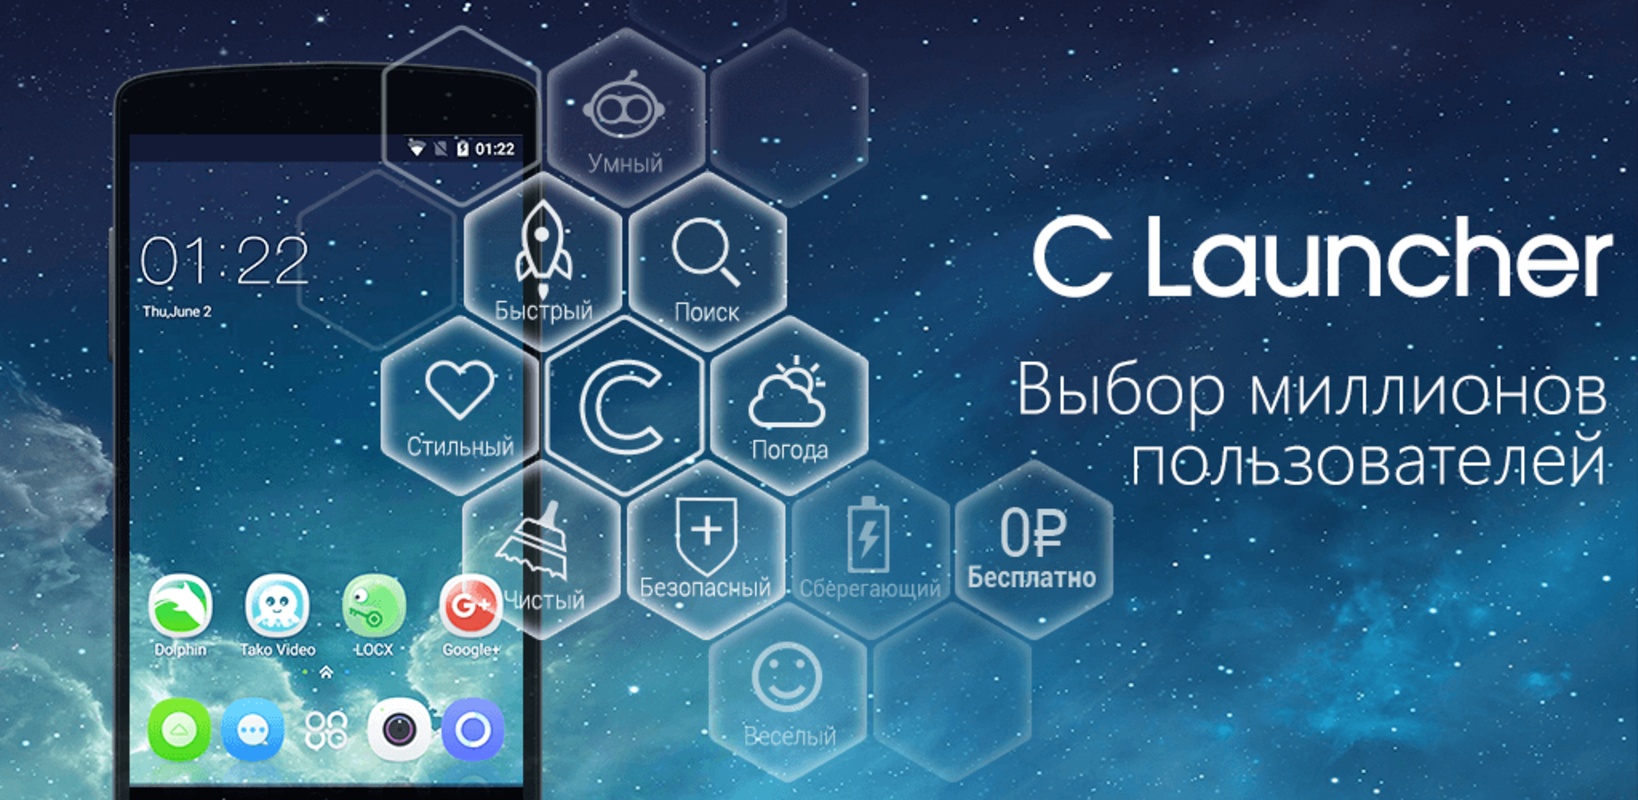 CLauncher 3.11.66 APK for Android Screenshot 28